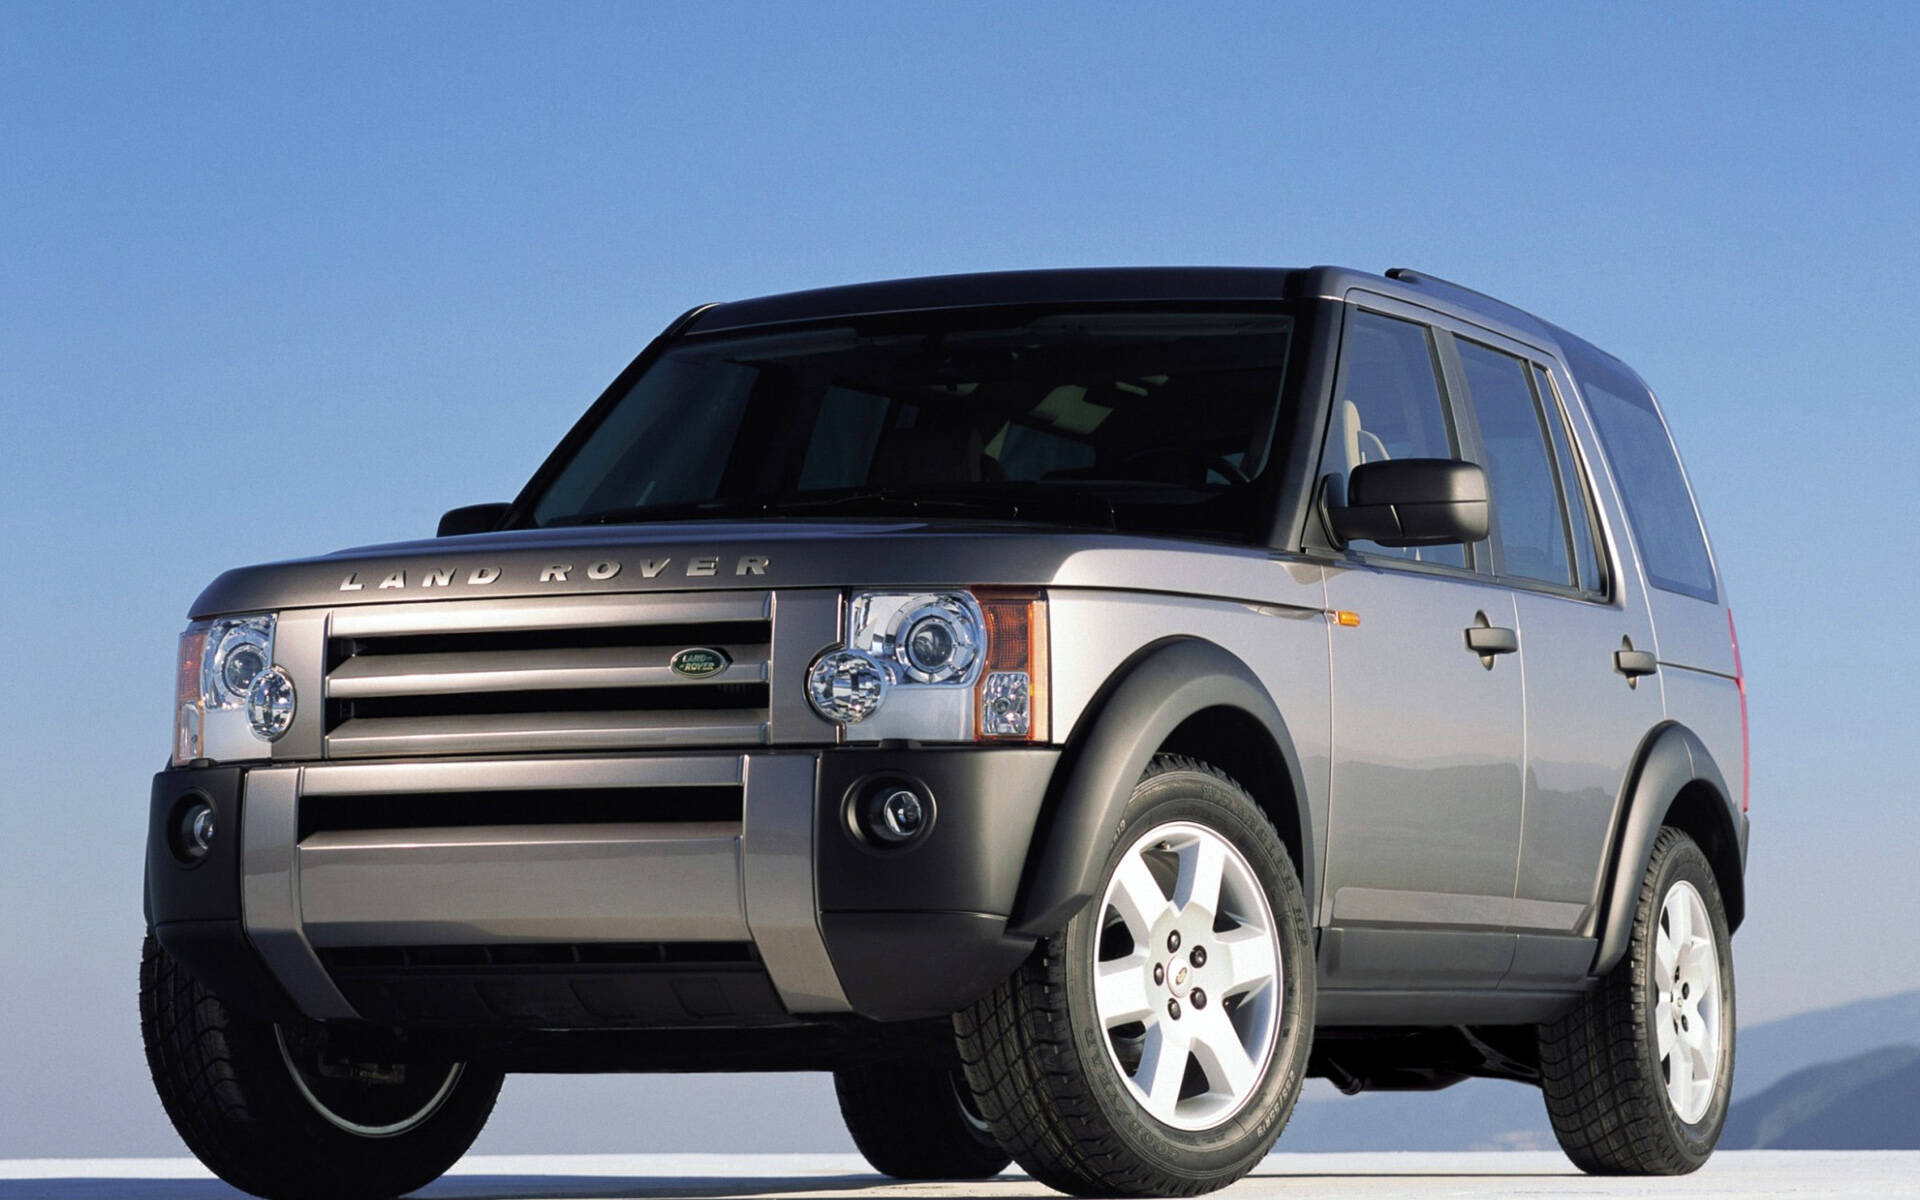 Land Rover LR3 SUV: Models, Generations and Details